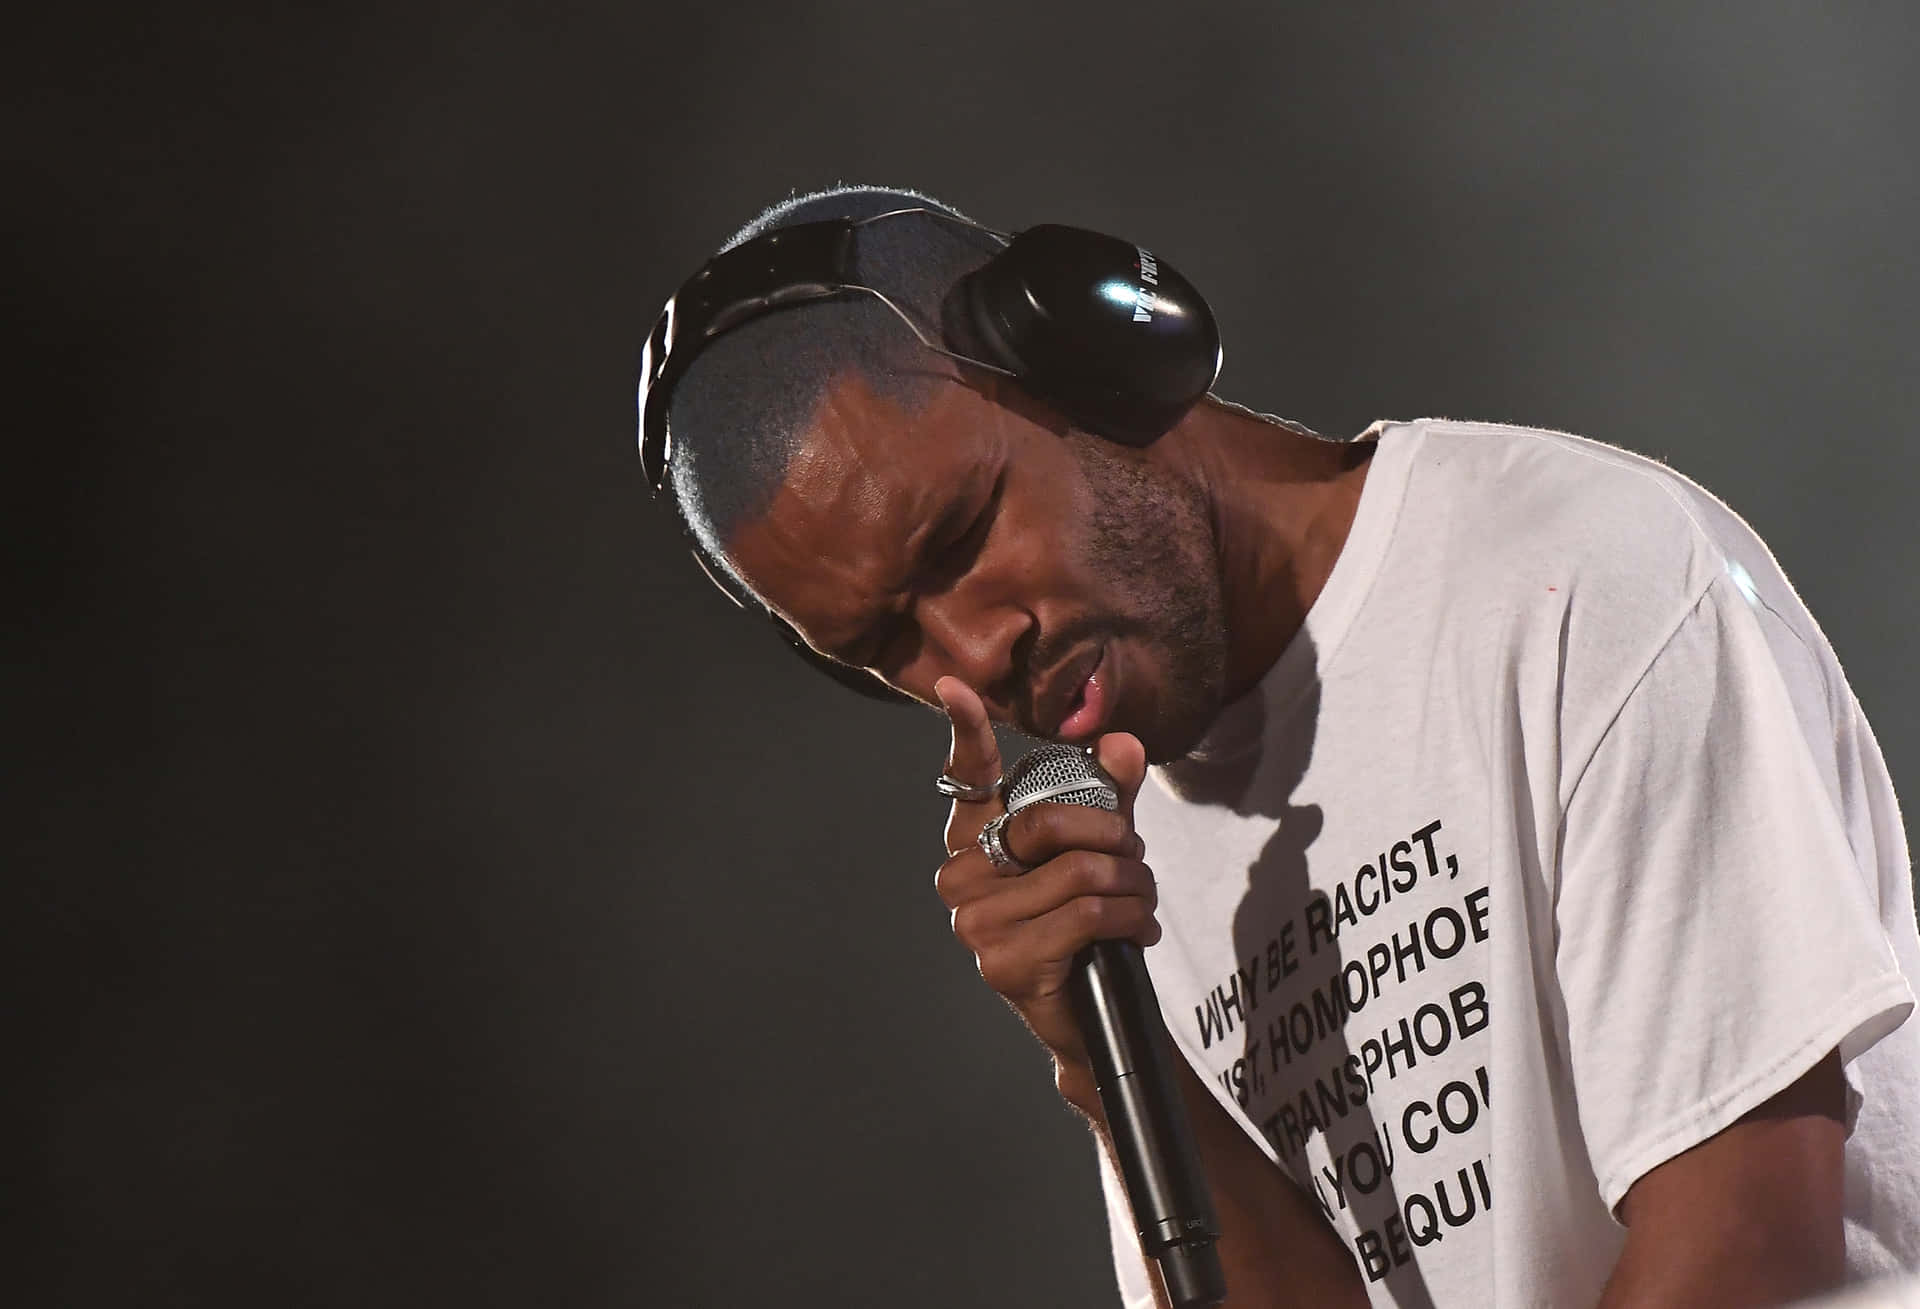 A Man With Headphones Is Holding A Microphone